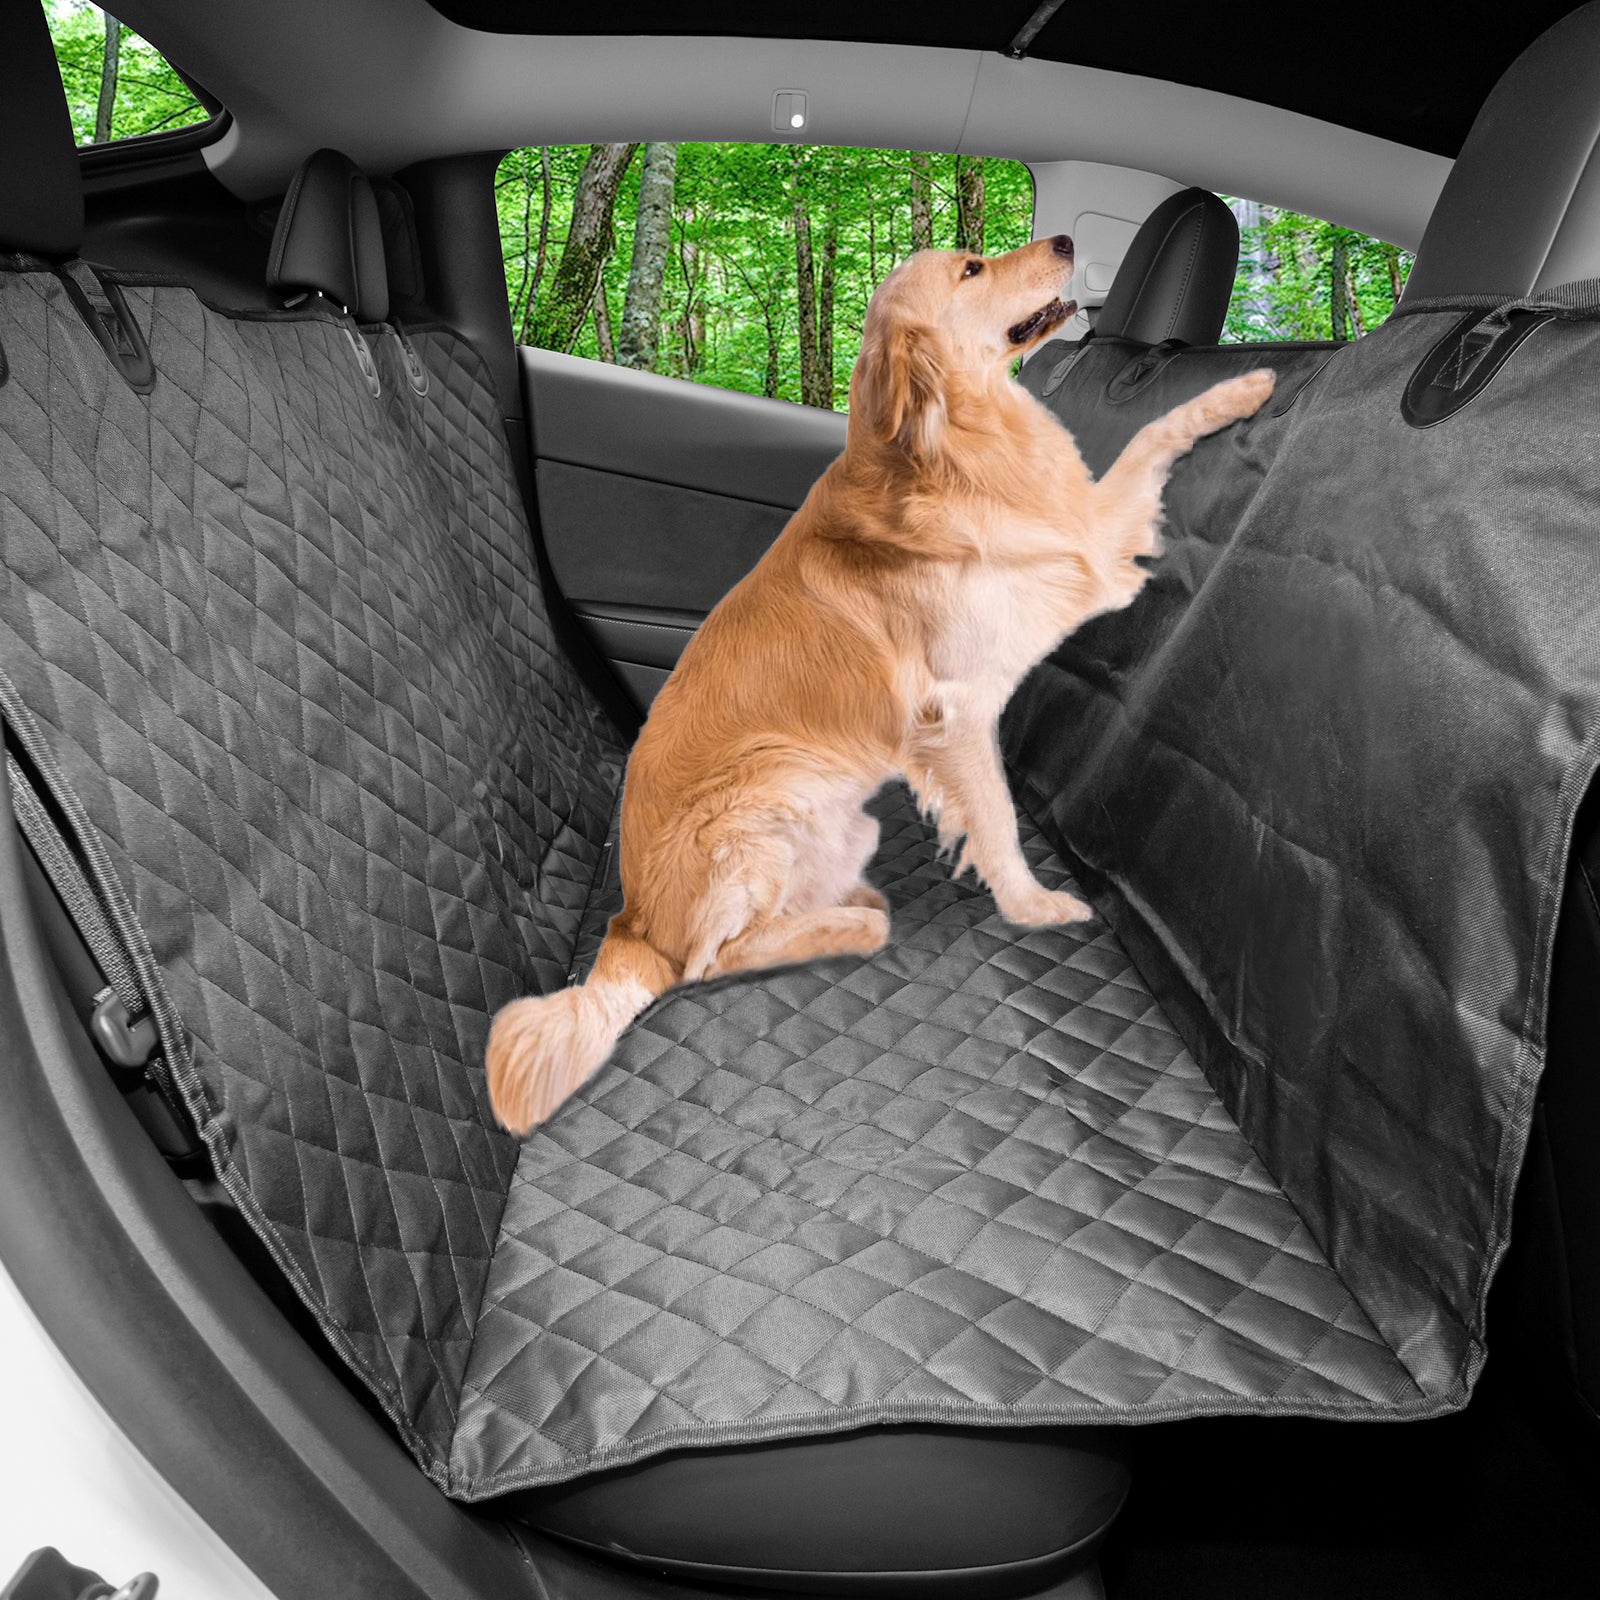 2022 Audi S3 Vehicle Seat Covers & Car Seat Protectors for Pets